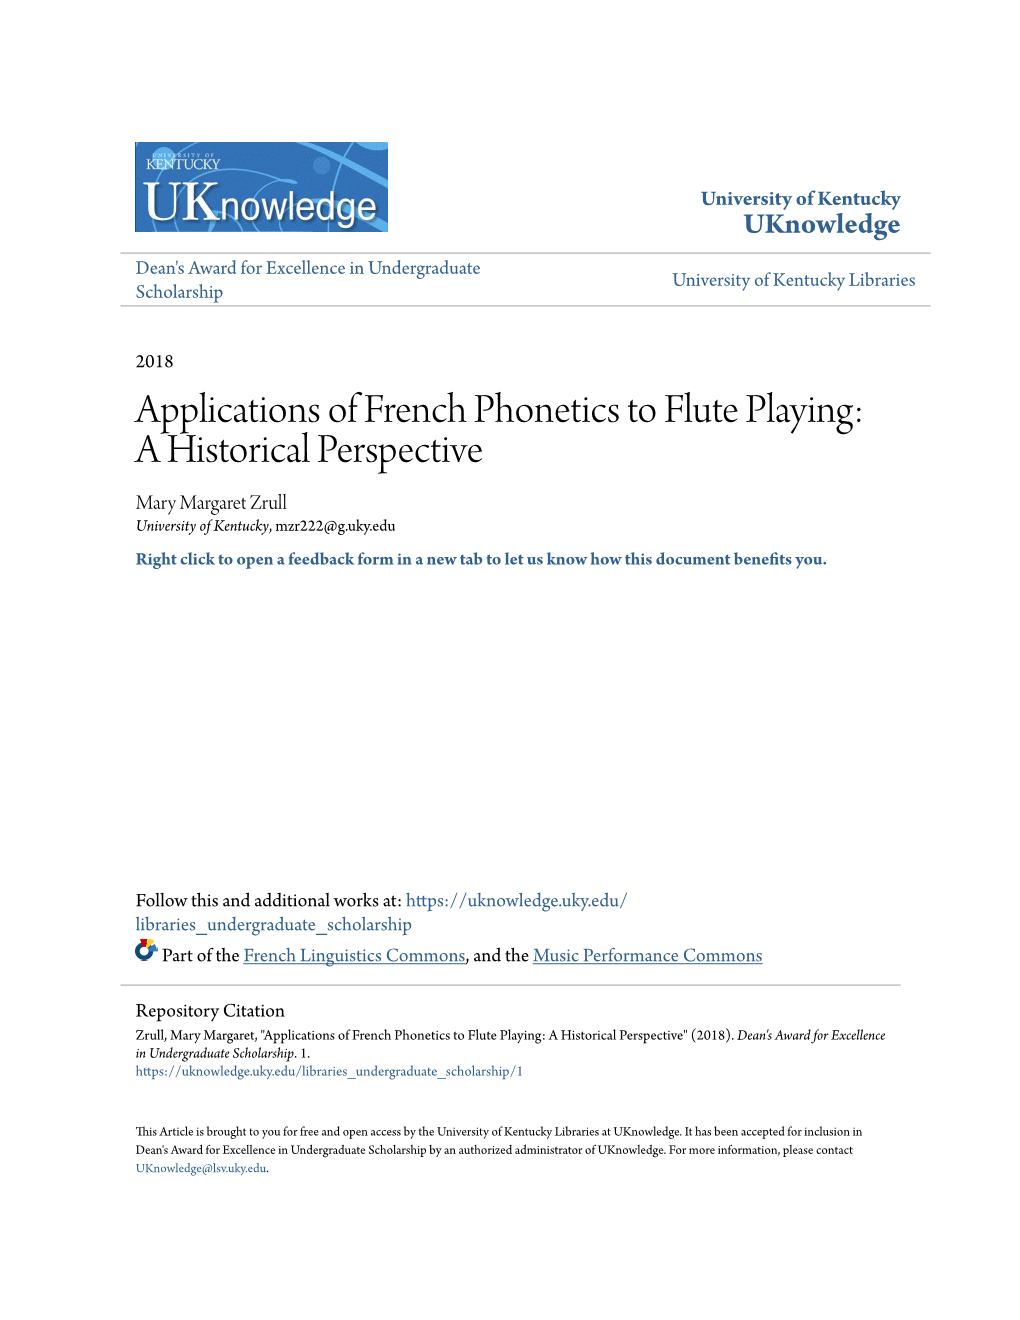 Applications of French Phonetics to Flute Playing: a Historical Perspective